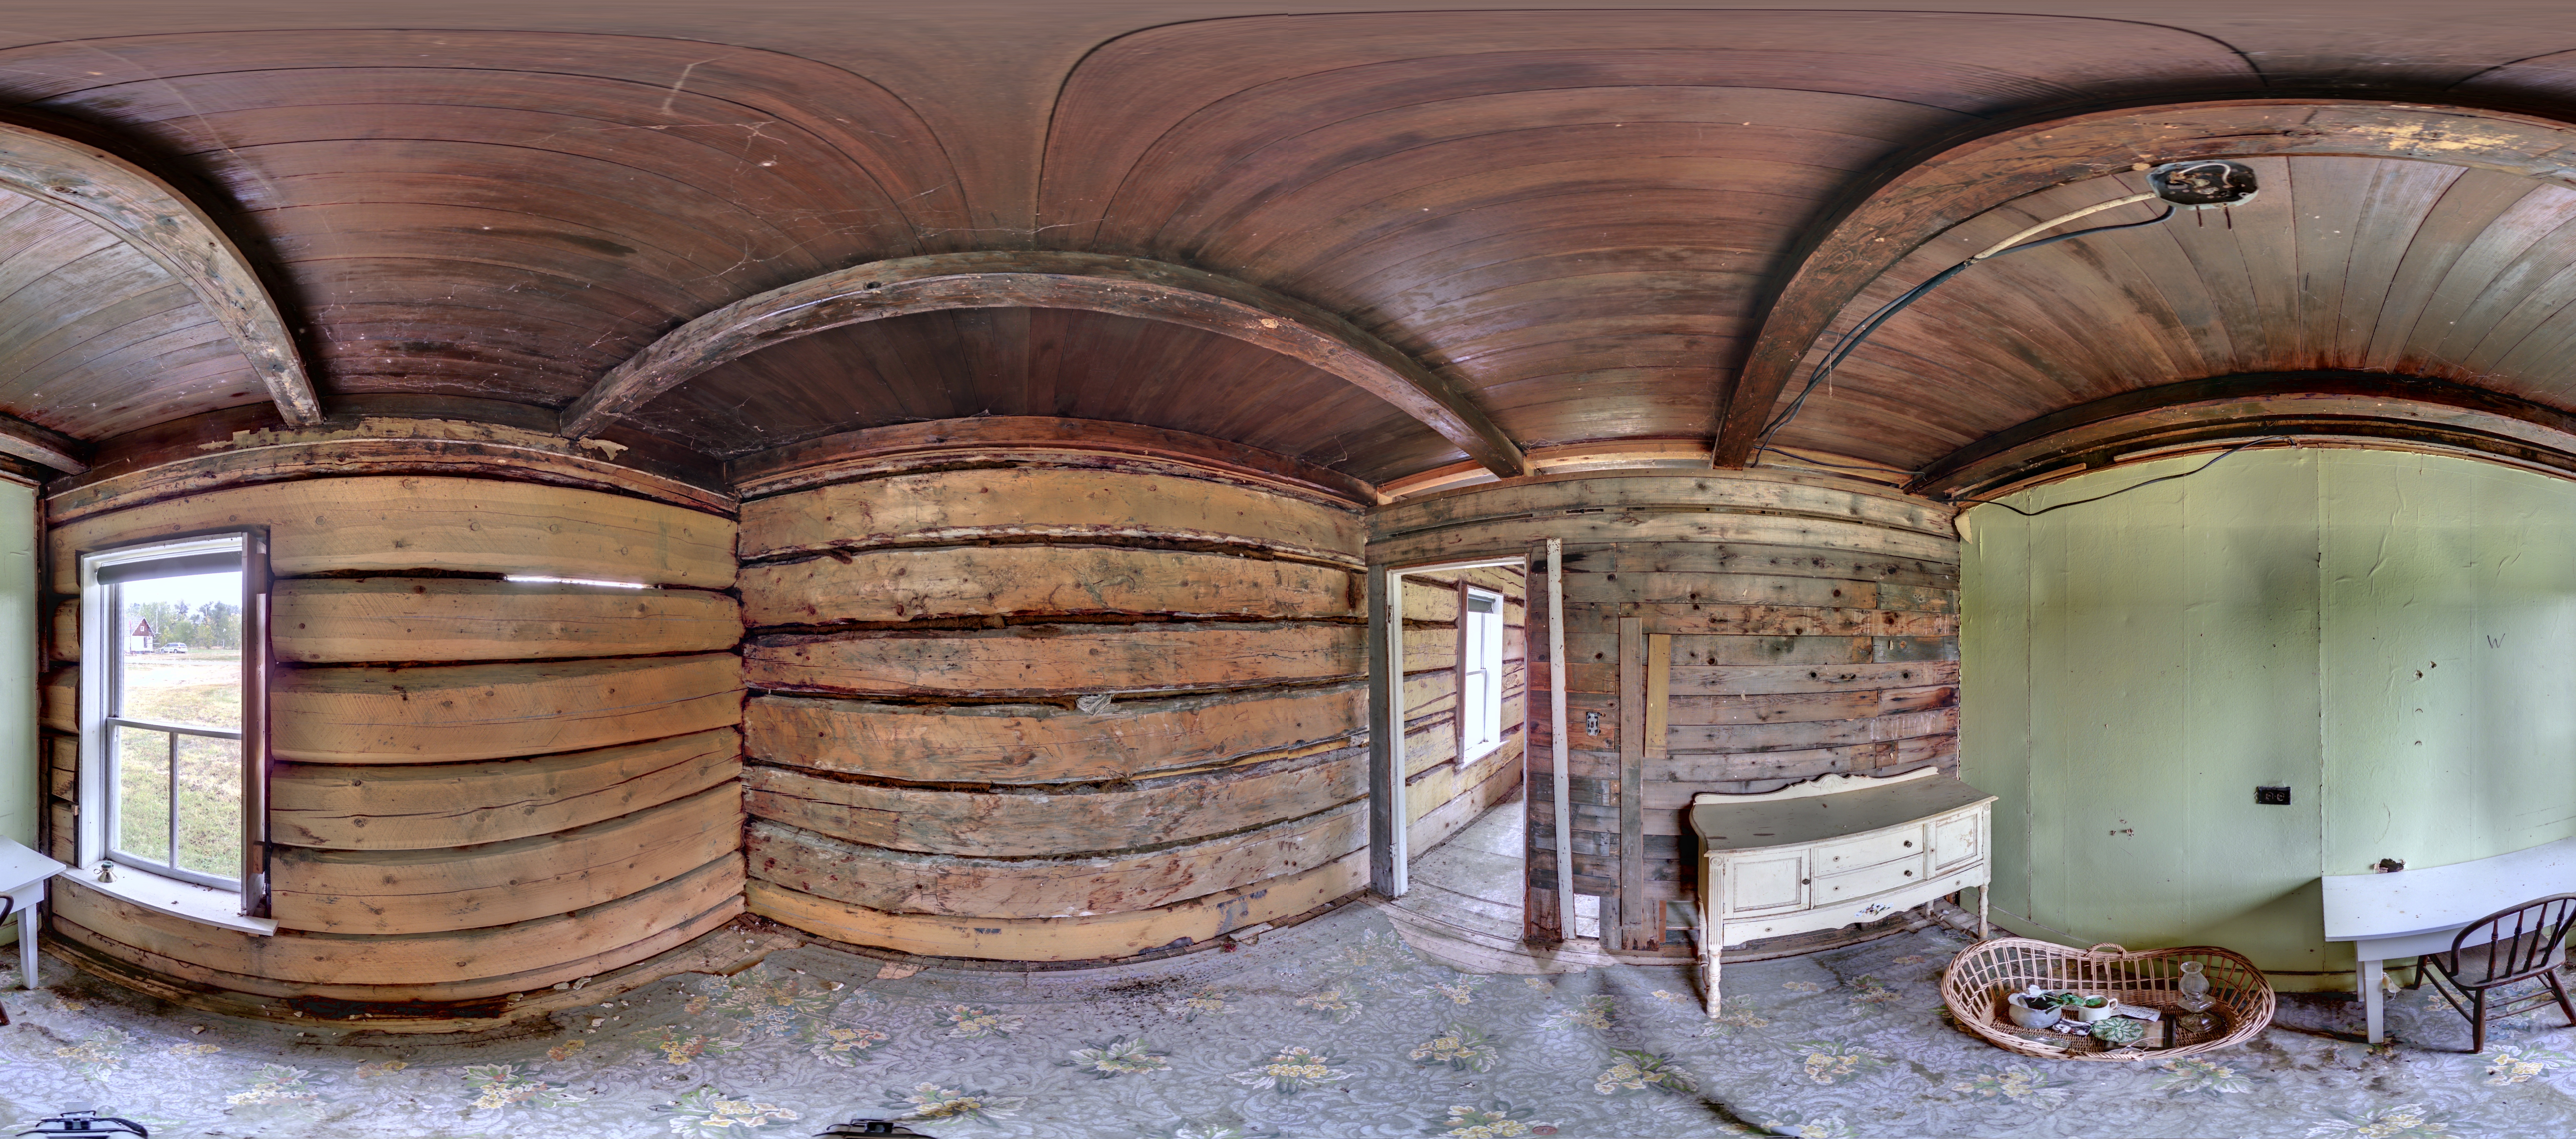 Panoramic image of scanning location 1 of the interior of the Foreman's House at Bar U Ranch